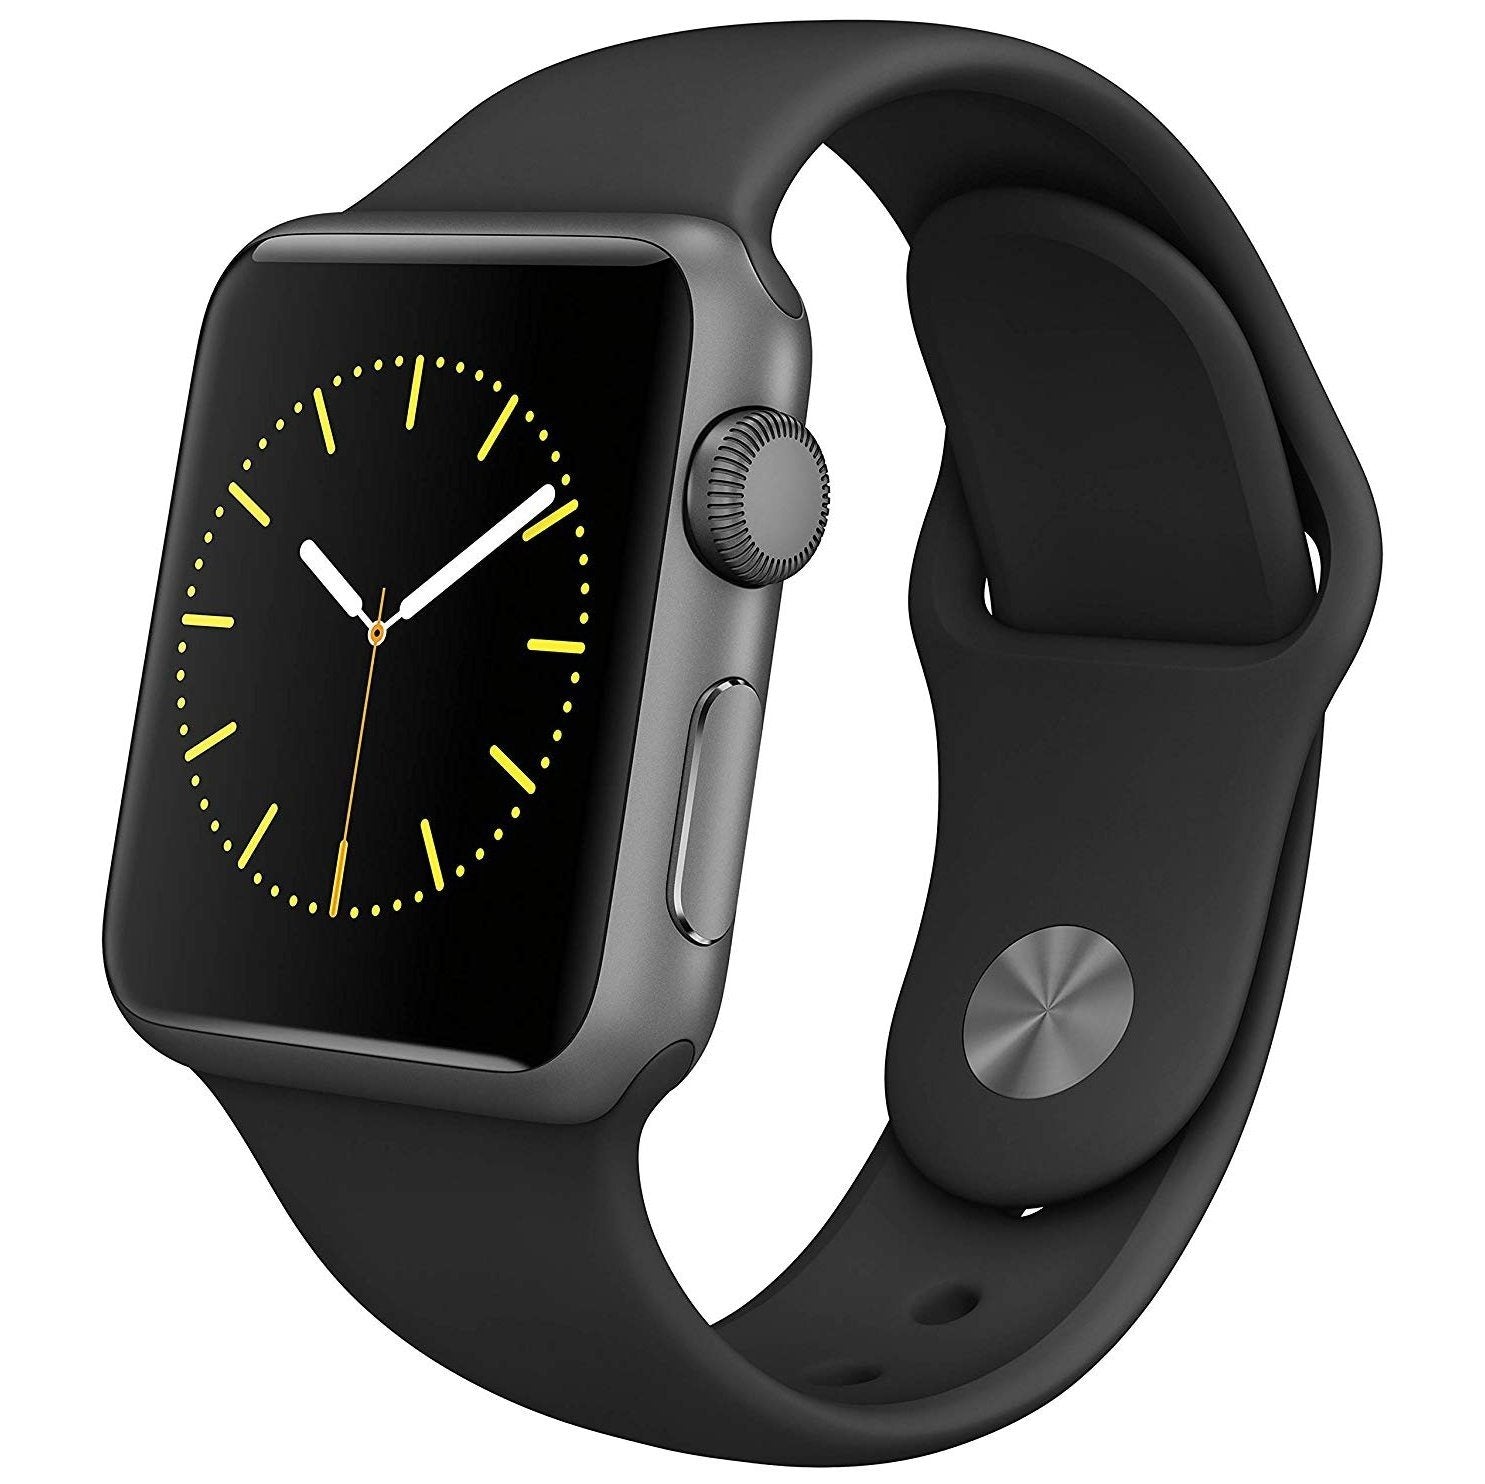 Apple Watch Smartwatch - Assorted Sizes and Colors / White / 38mm